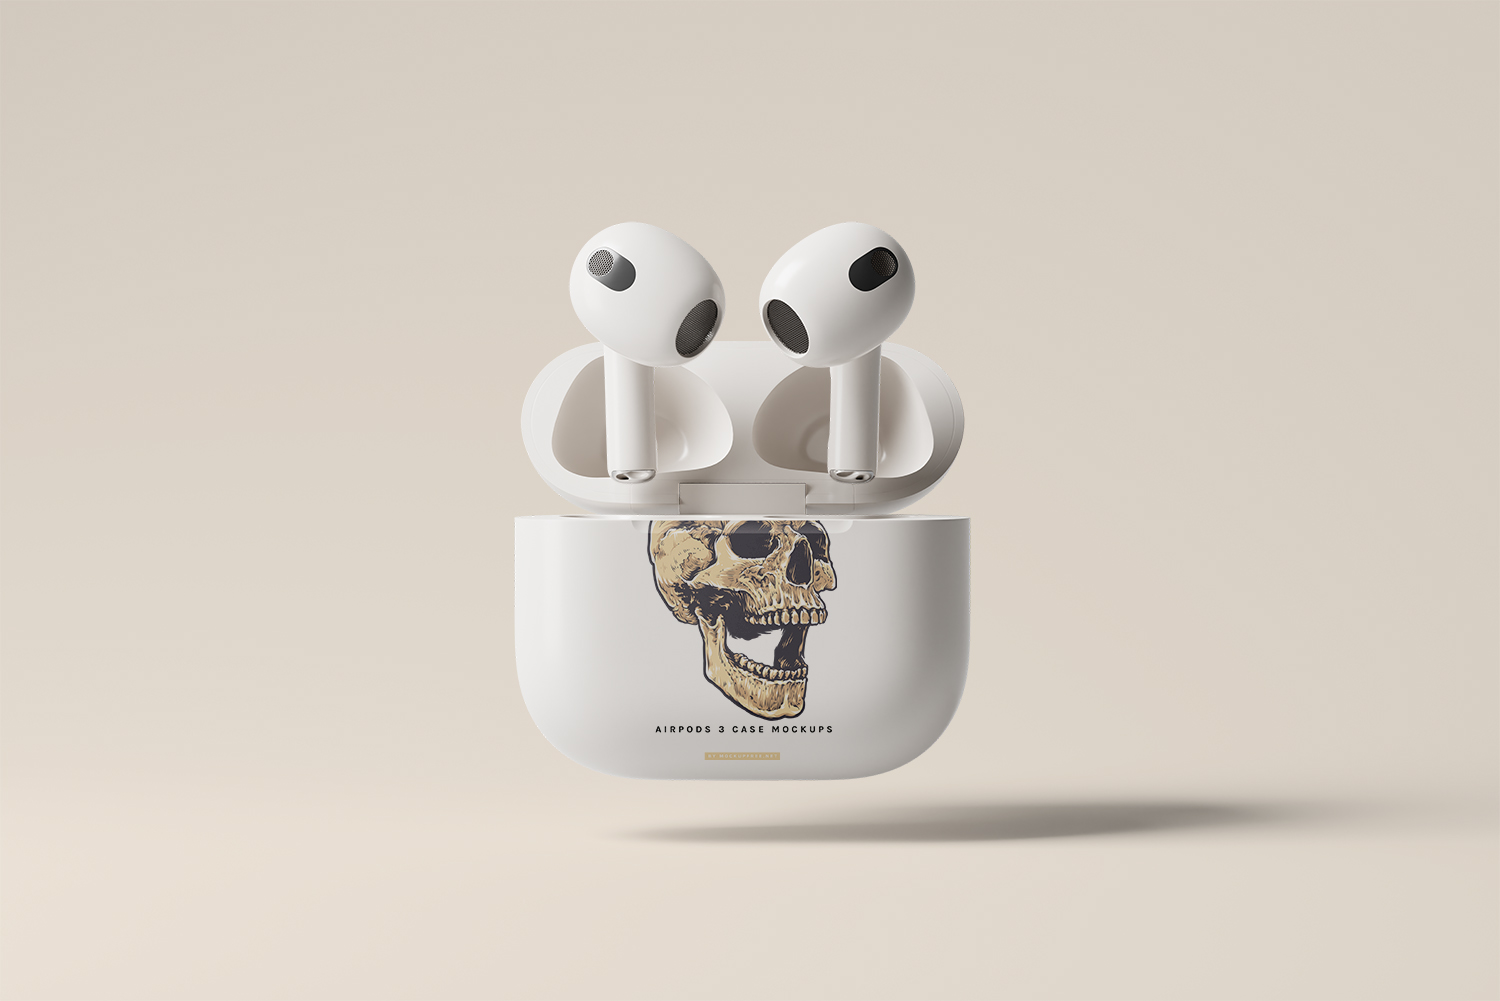 Apple Airpods 3 Case Free Mockups